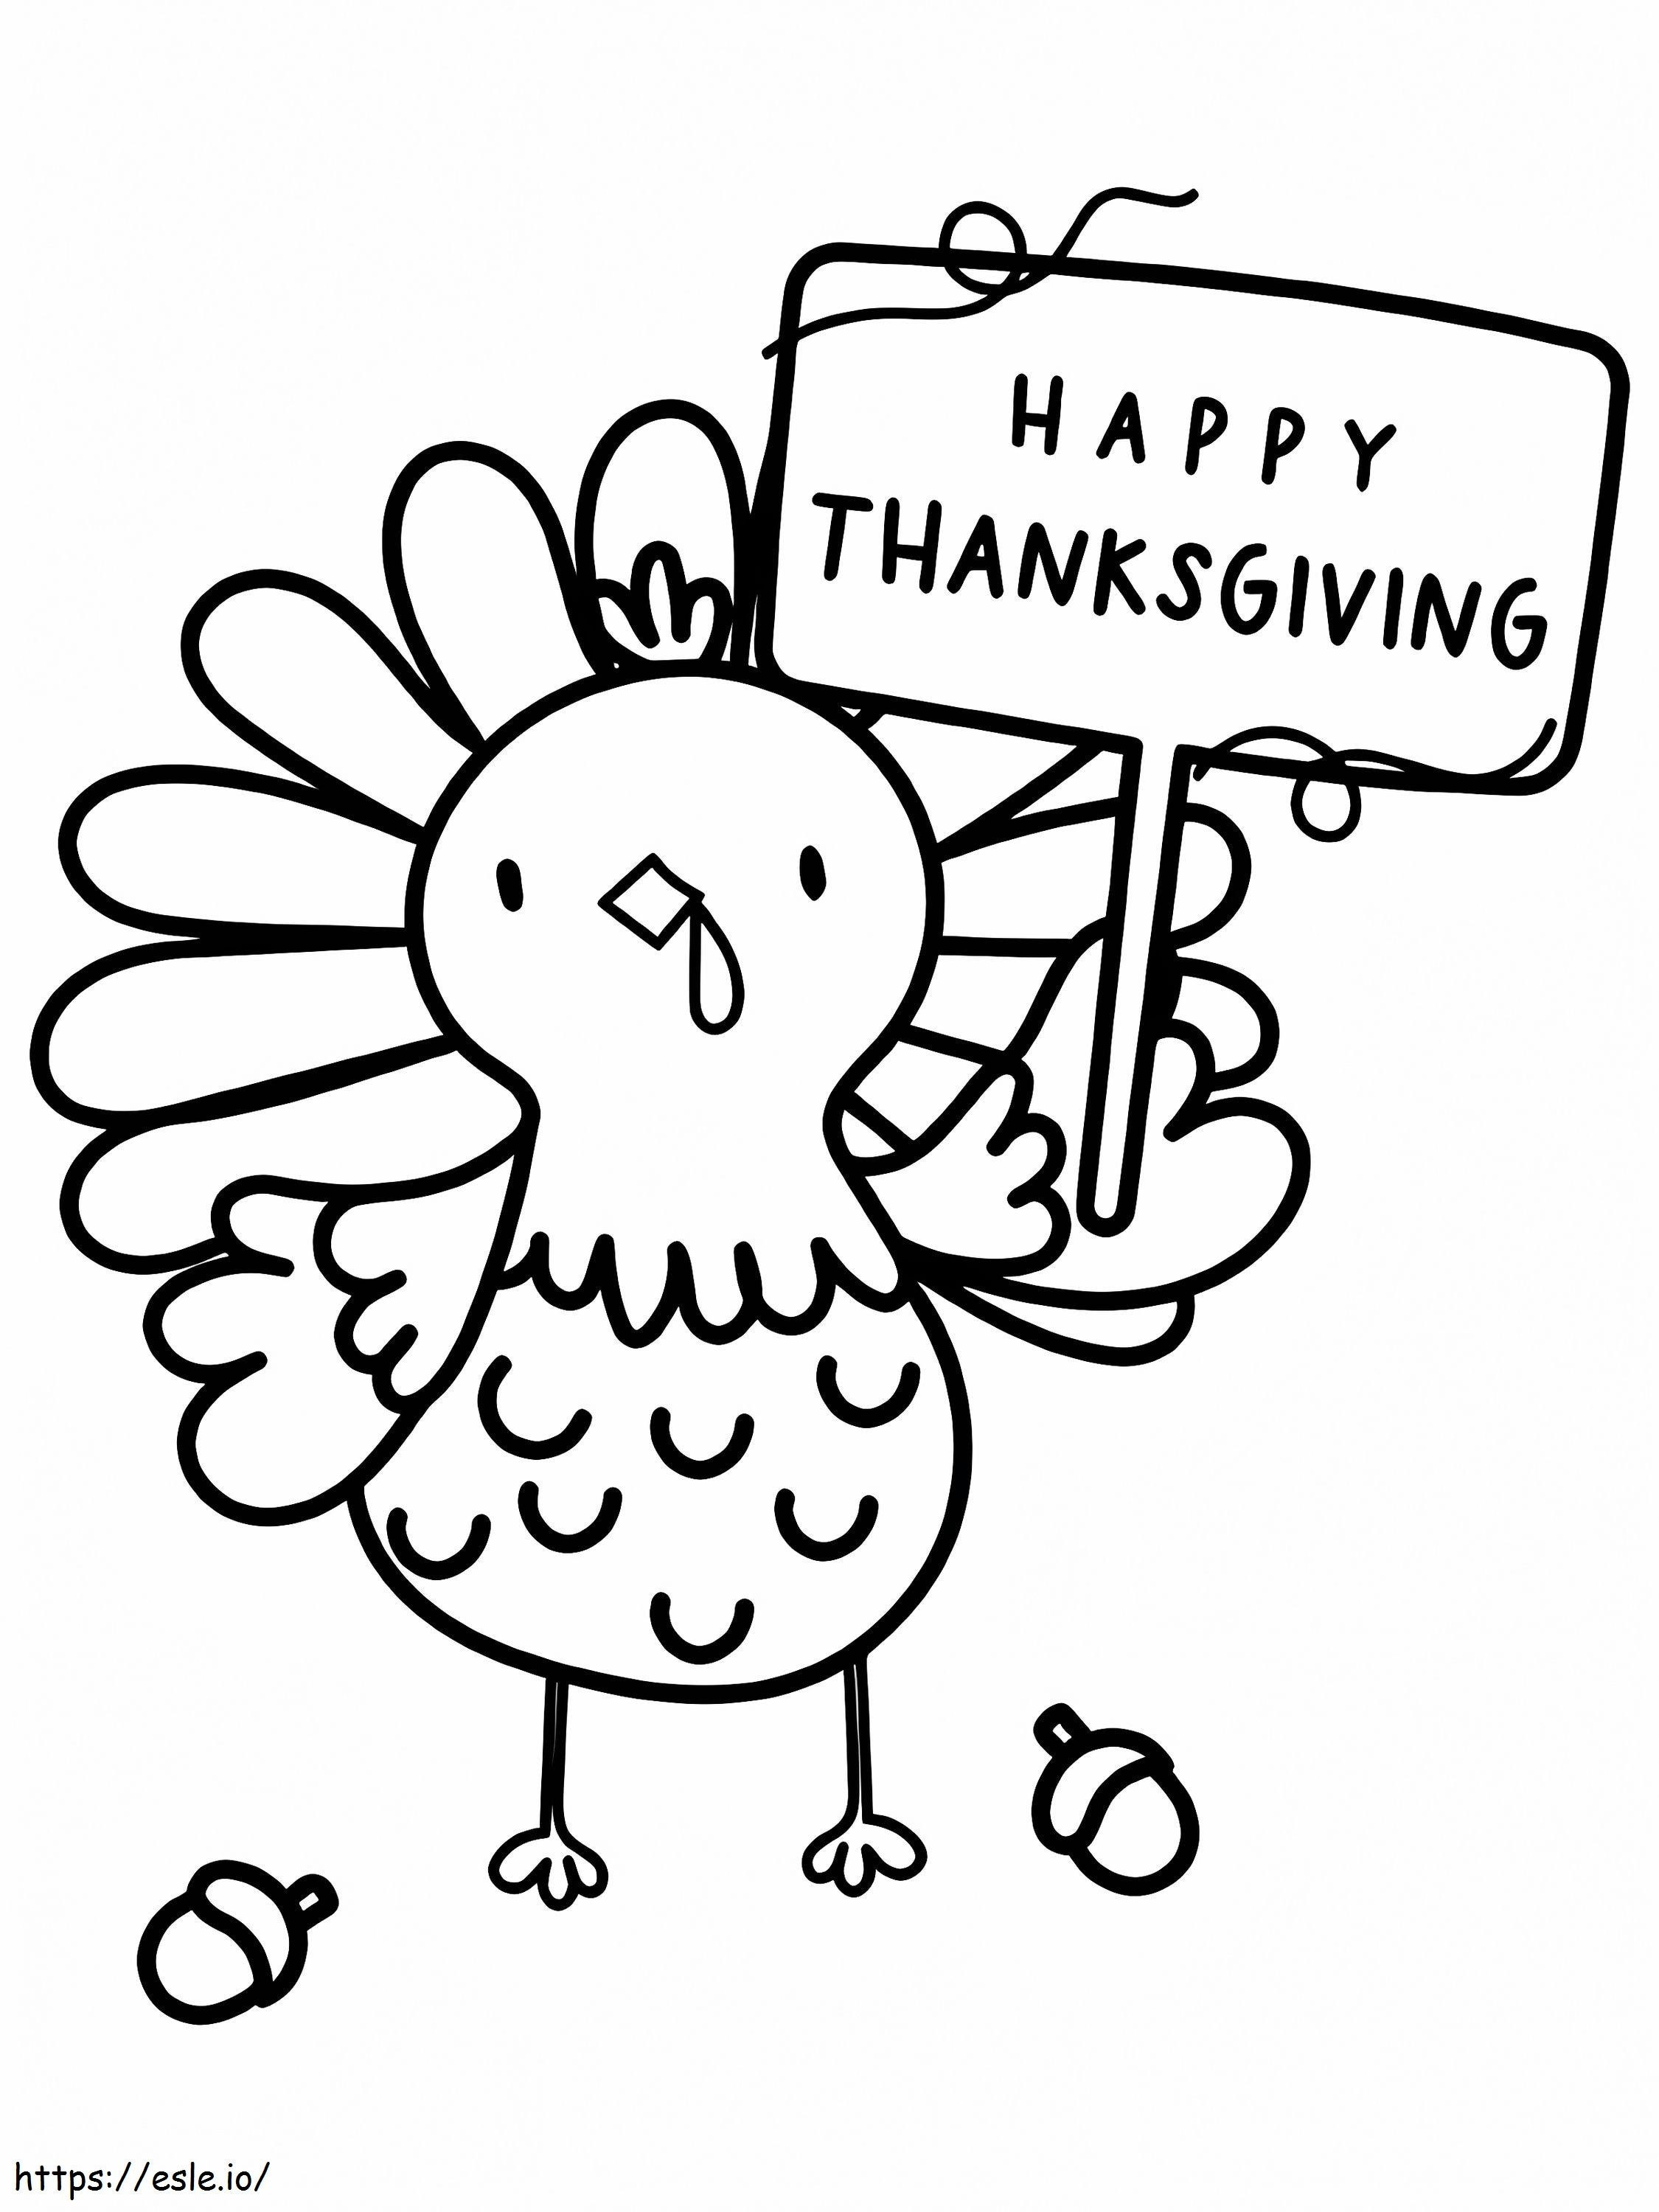 Happy Thanksgiving Turkey 2 coloring page